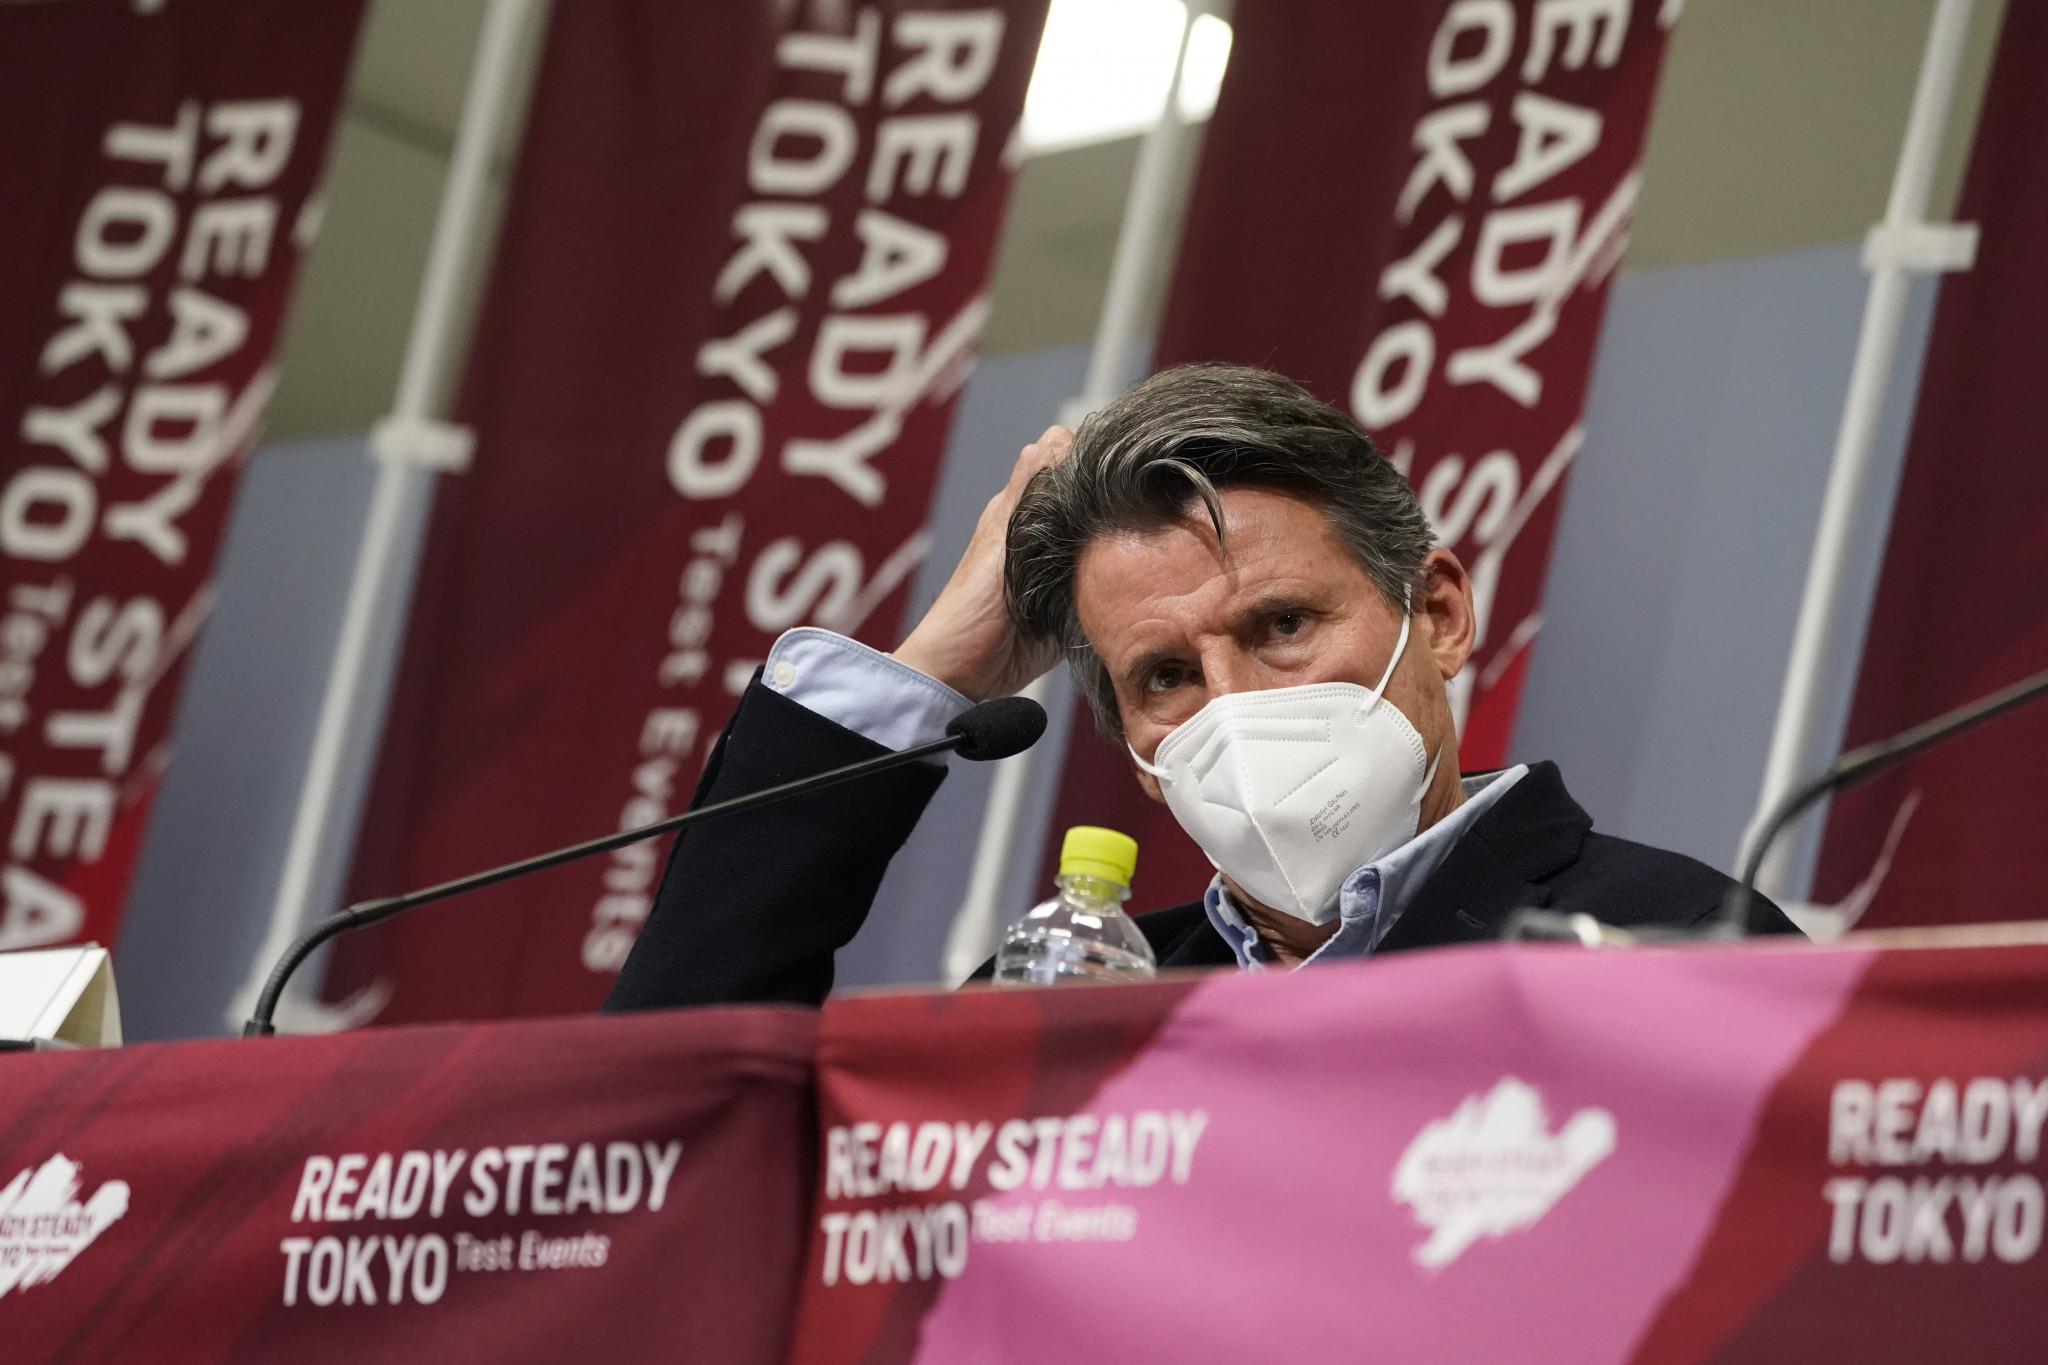 Coe reassured Tokyo 2020 can be held safely following attendance at test events